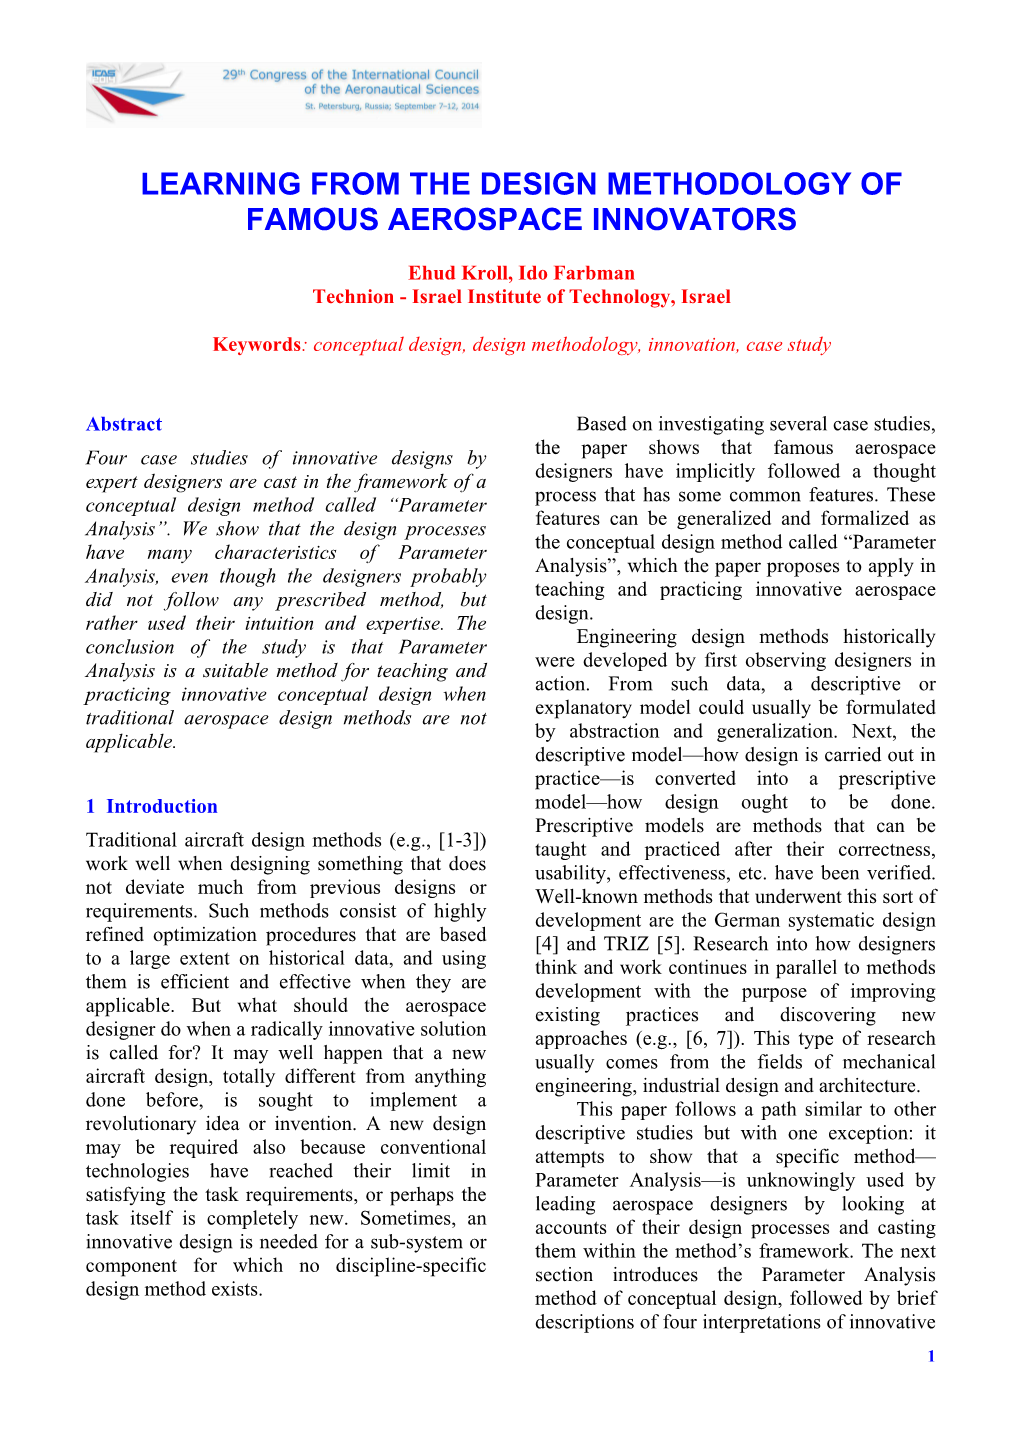 Learning from the Design Methodology of Famous Aerospace Innovators